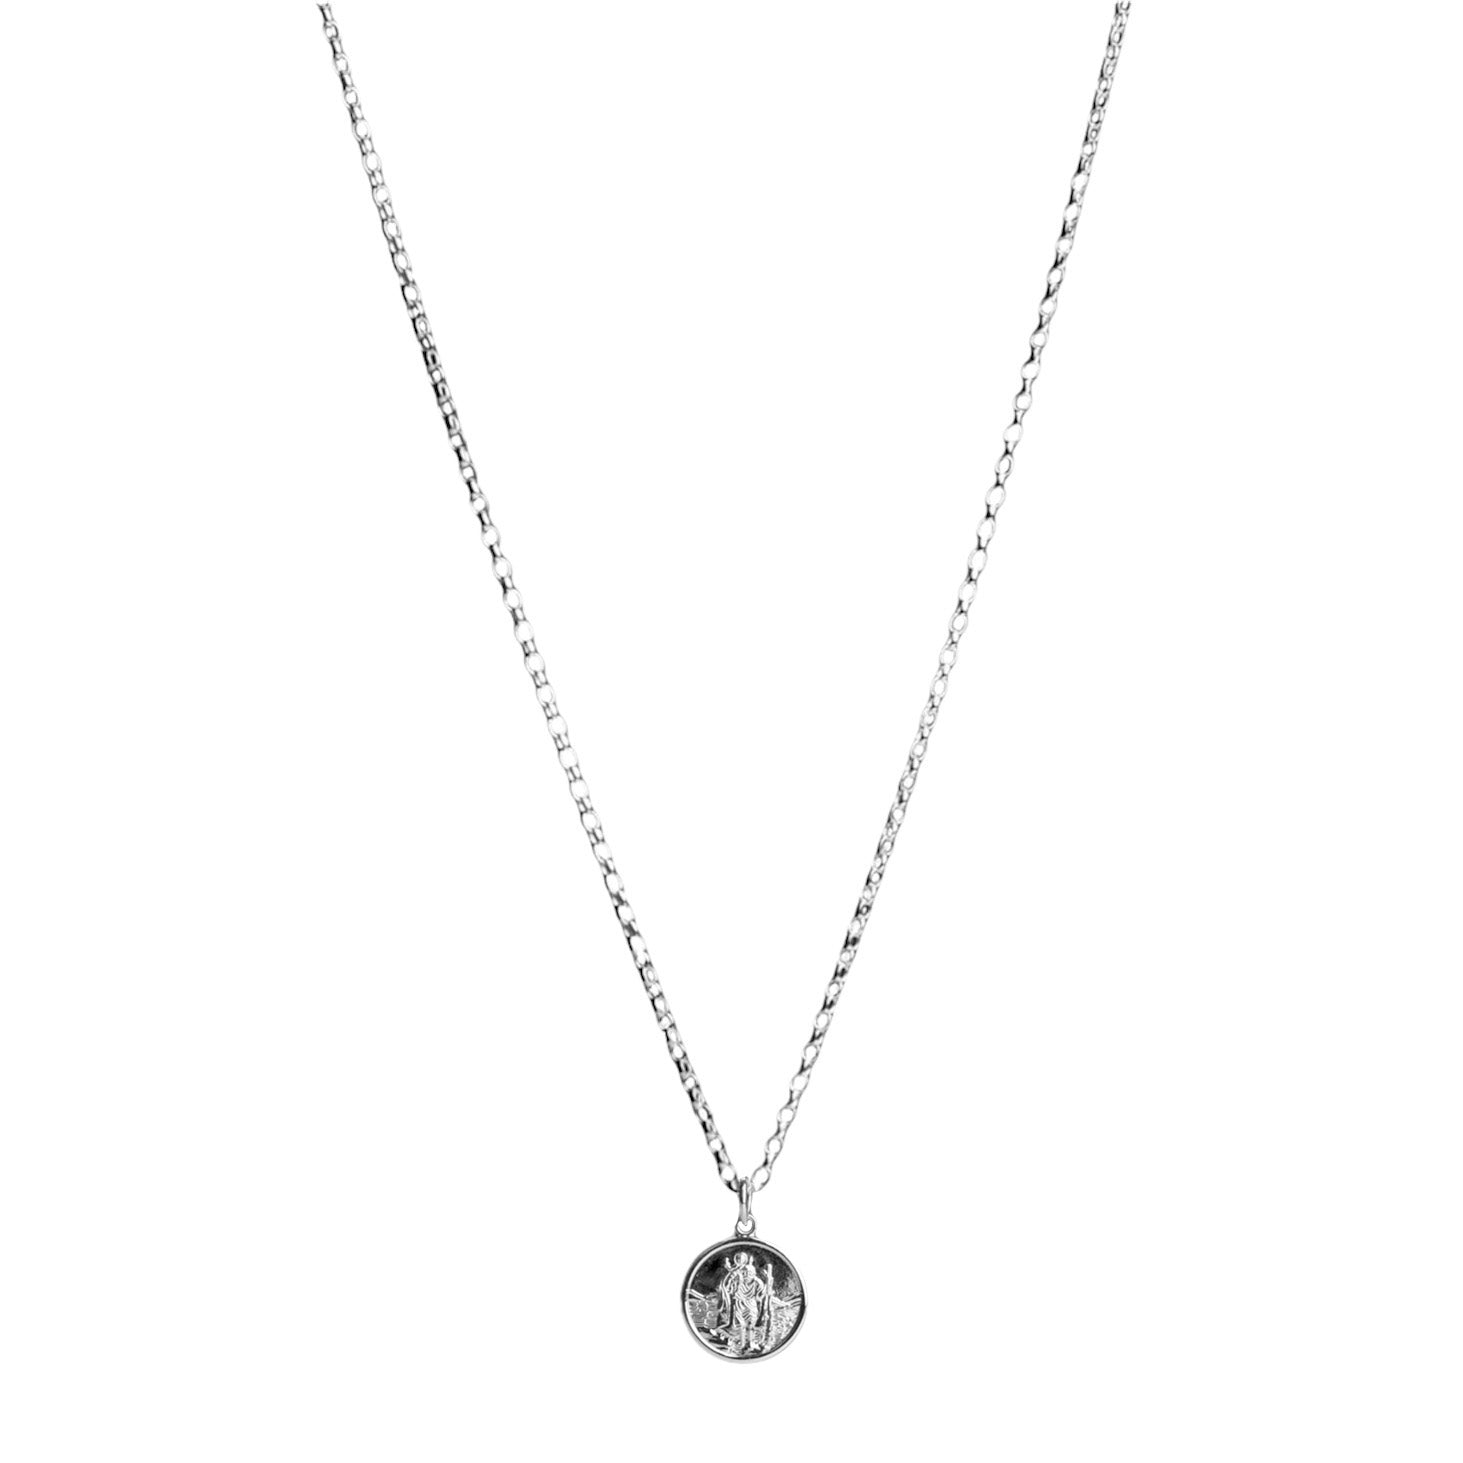 Belle & Bee St Christopher necklace